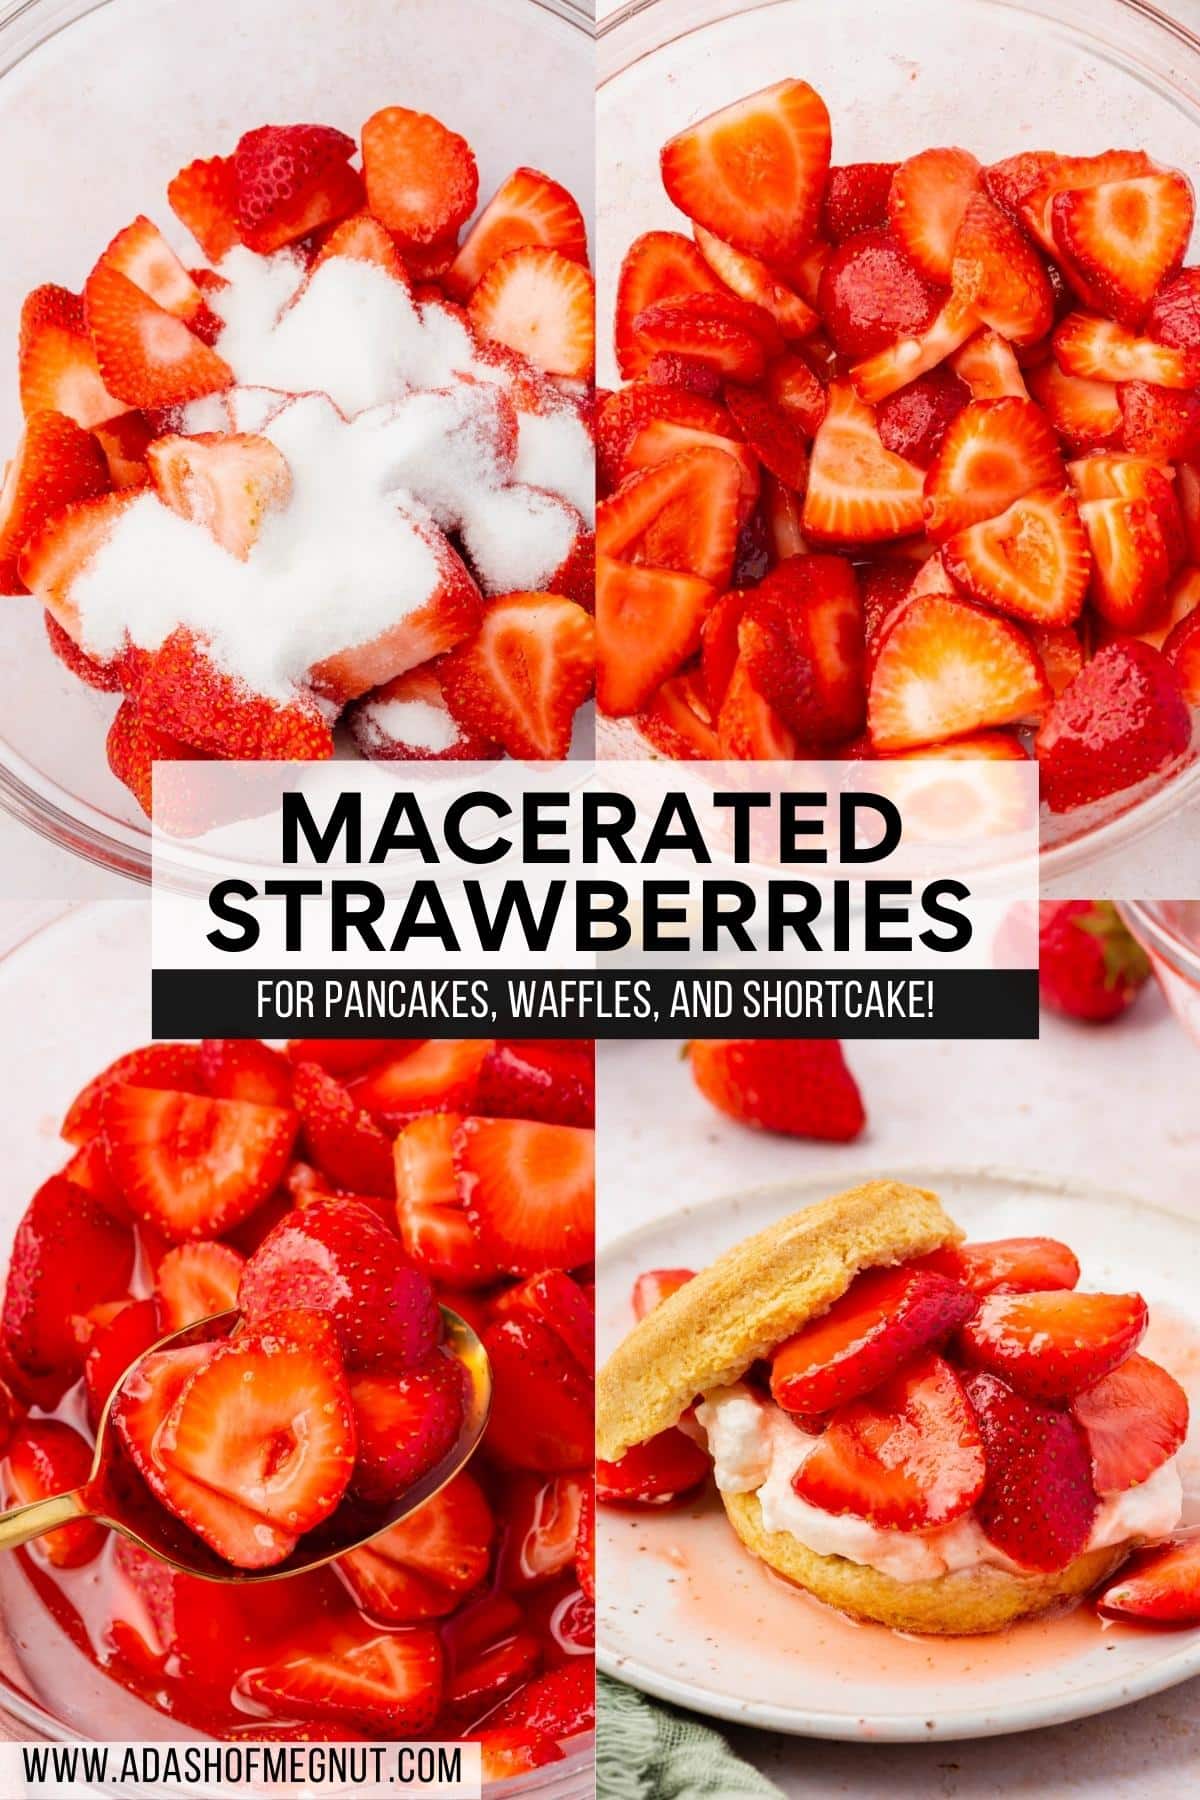 A four photo collage showing the process of macerating strawberries from topping strawberries with sugar, mixing together, letting sit at room temperature for an hour, and then using in a recipe like strawberry shortcake.